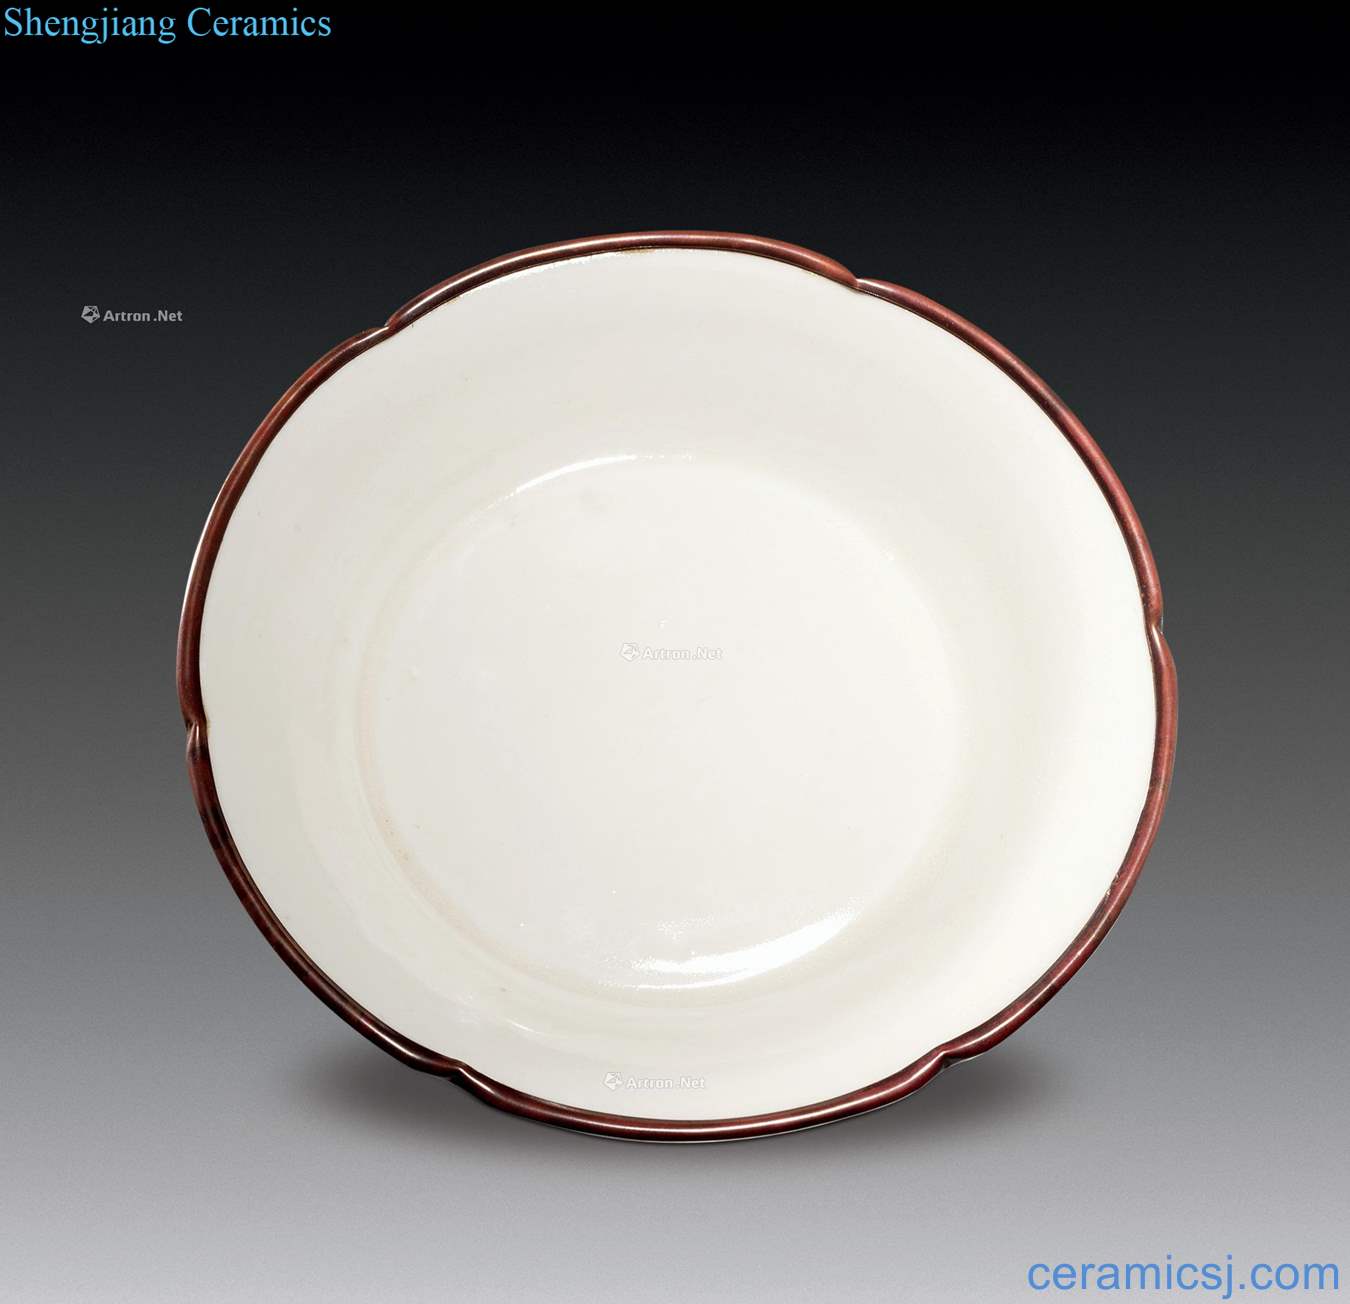 The song kiln kwai plate